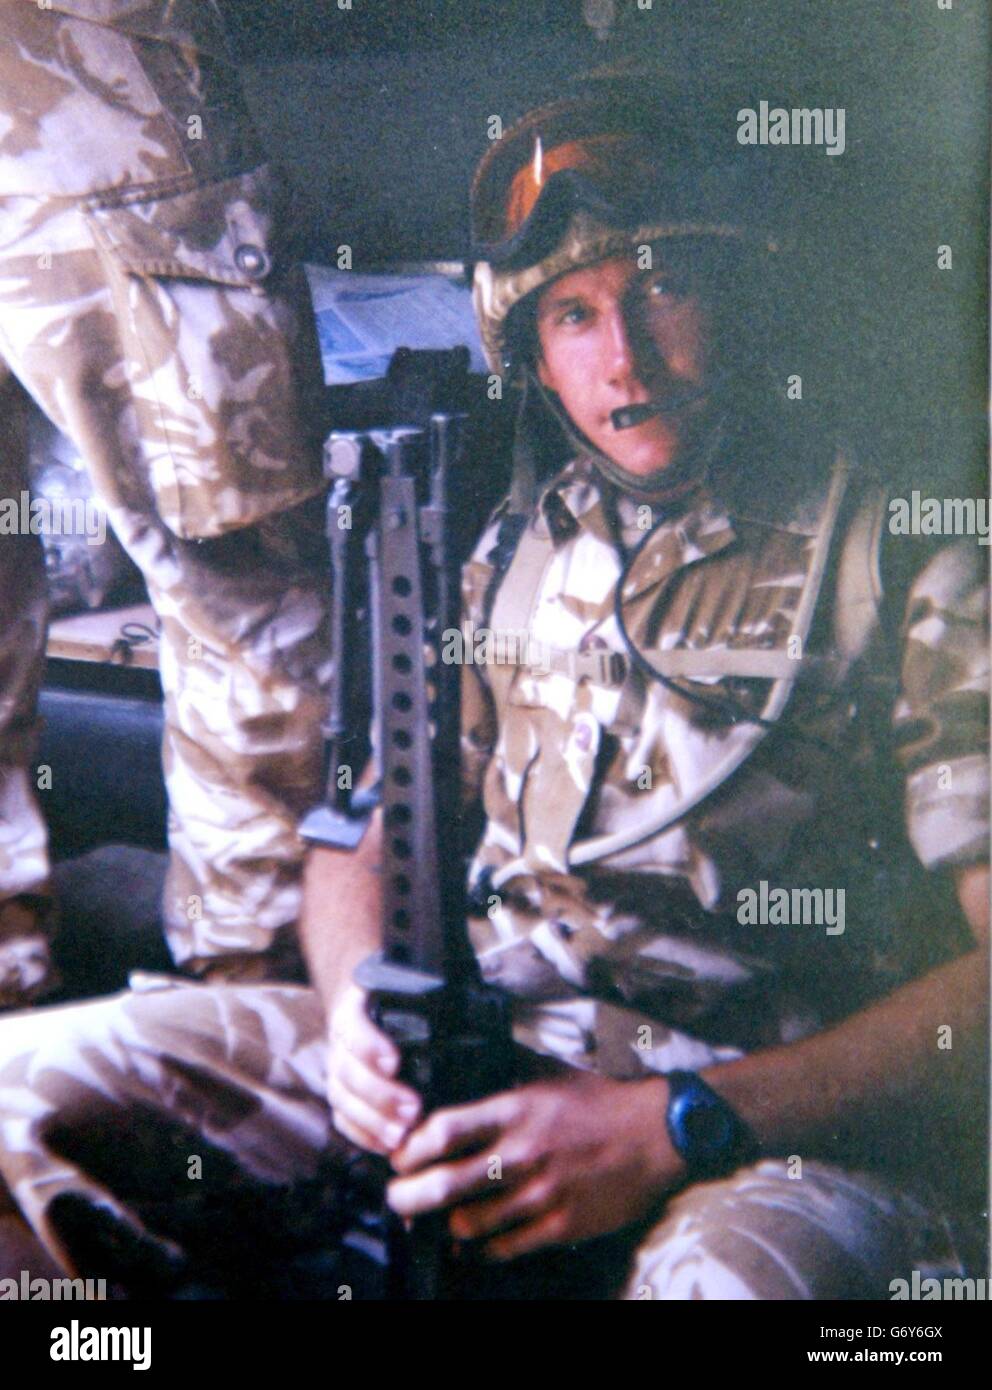 Kingsman Michael Davison, 22, from Liverpool, of the King's and Cheshire Territorial Army Regiment whilst serving in Iraq, who was awarded the Military Cross. The builder - who is the first part-time soldier to be awarded the Military Cross since the Second World War - received the award for the outstanding bravery he displayed on his first operational tour of duty in Iraq last summer, where he rescued his wounded platoon commander, under heavy fire. Stock Photo